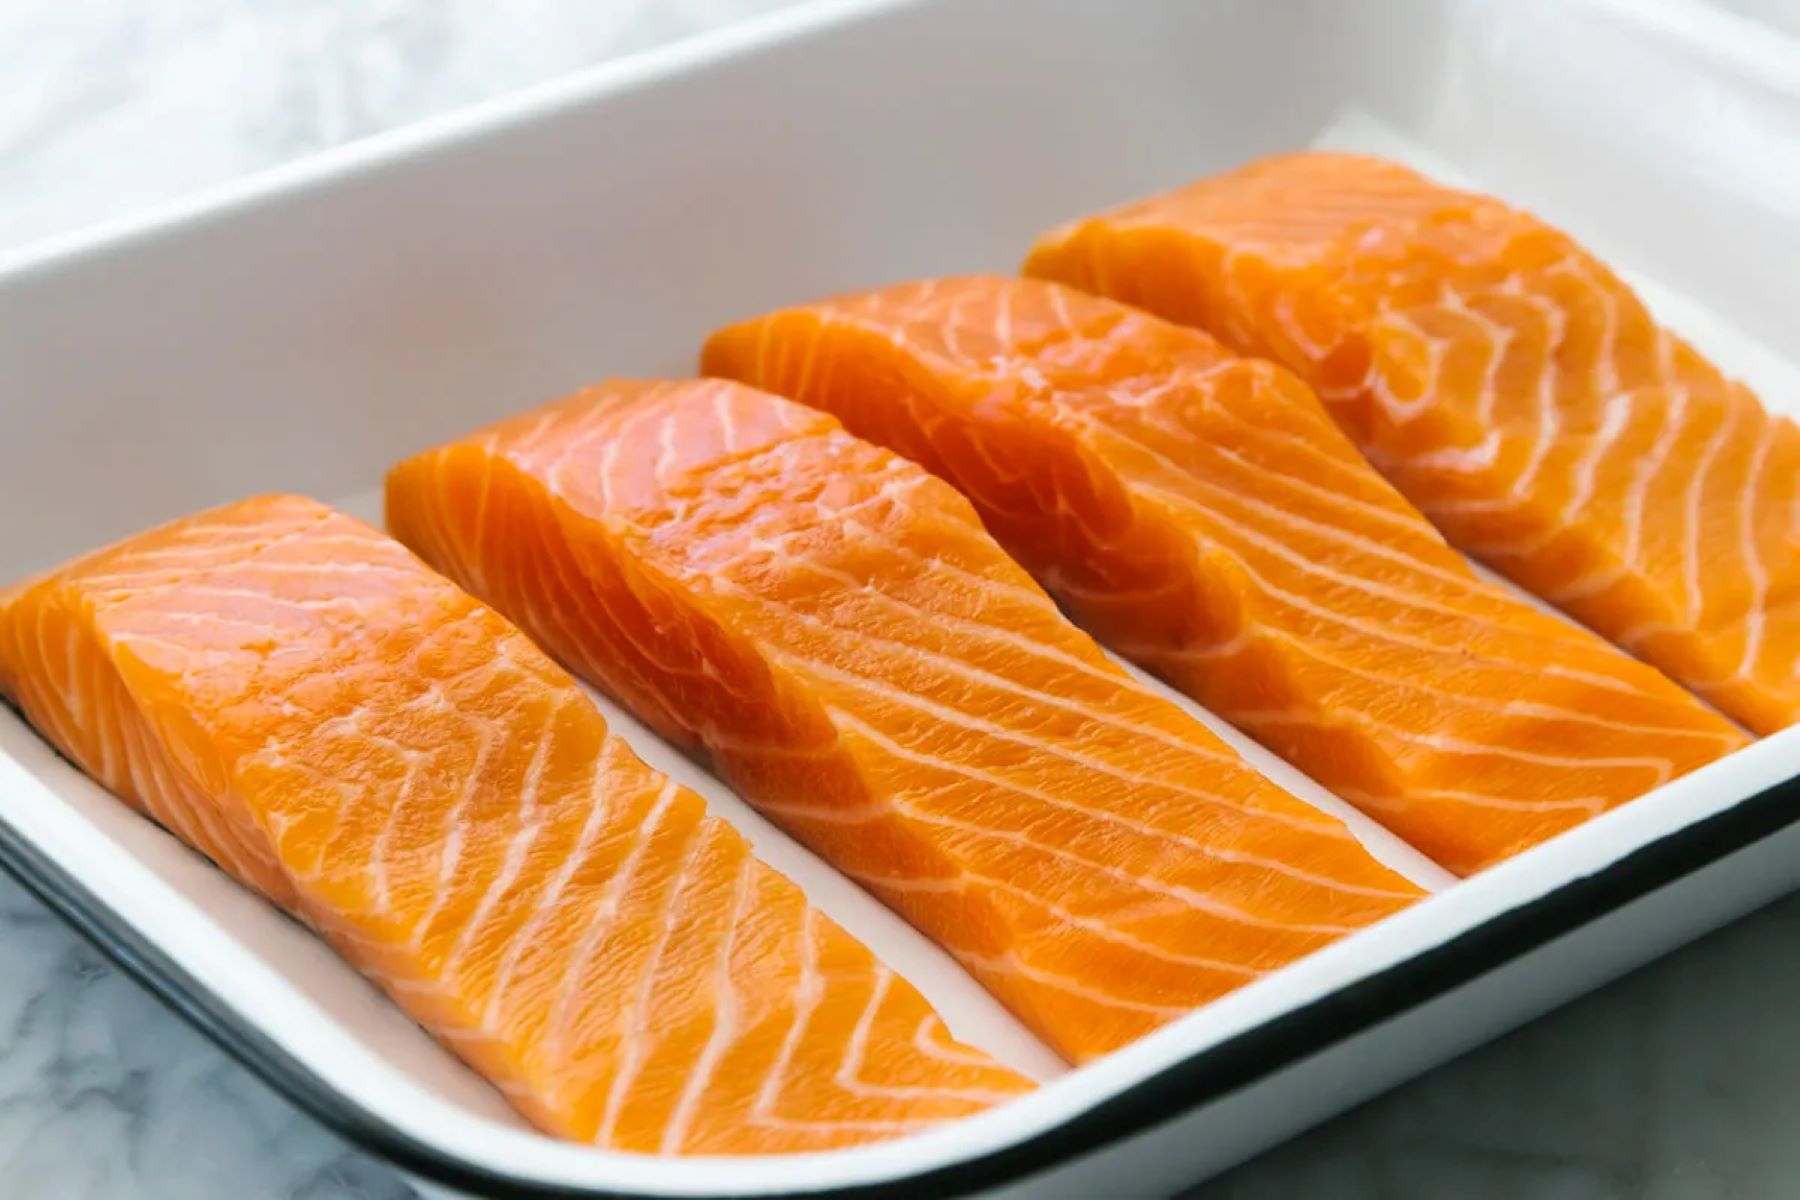 Discover The Perfect Oven Baking Time For Salmon Fillets!